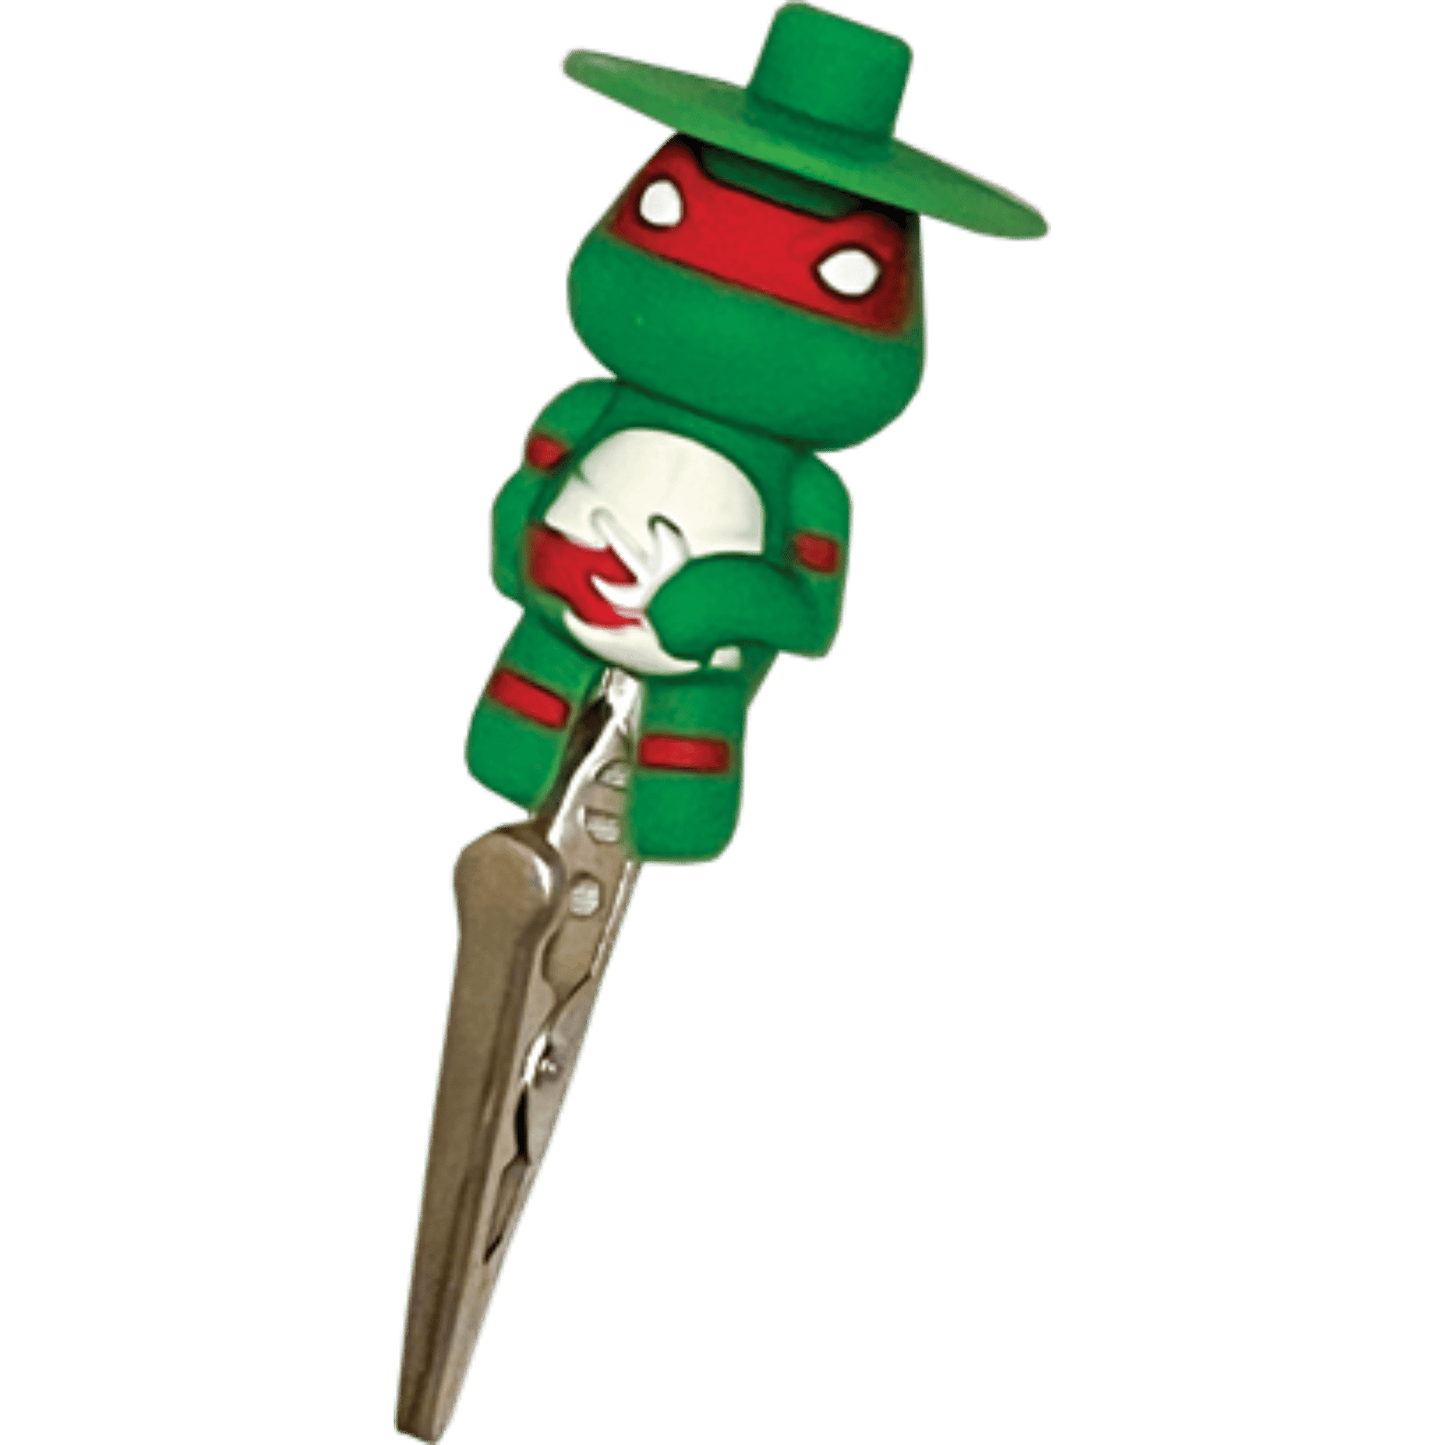 Character Roach Clips